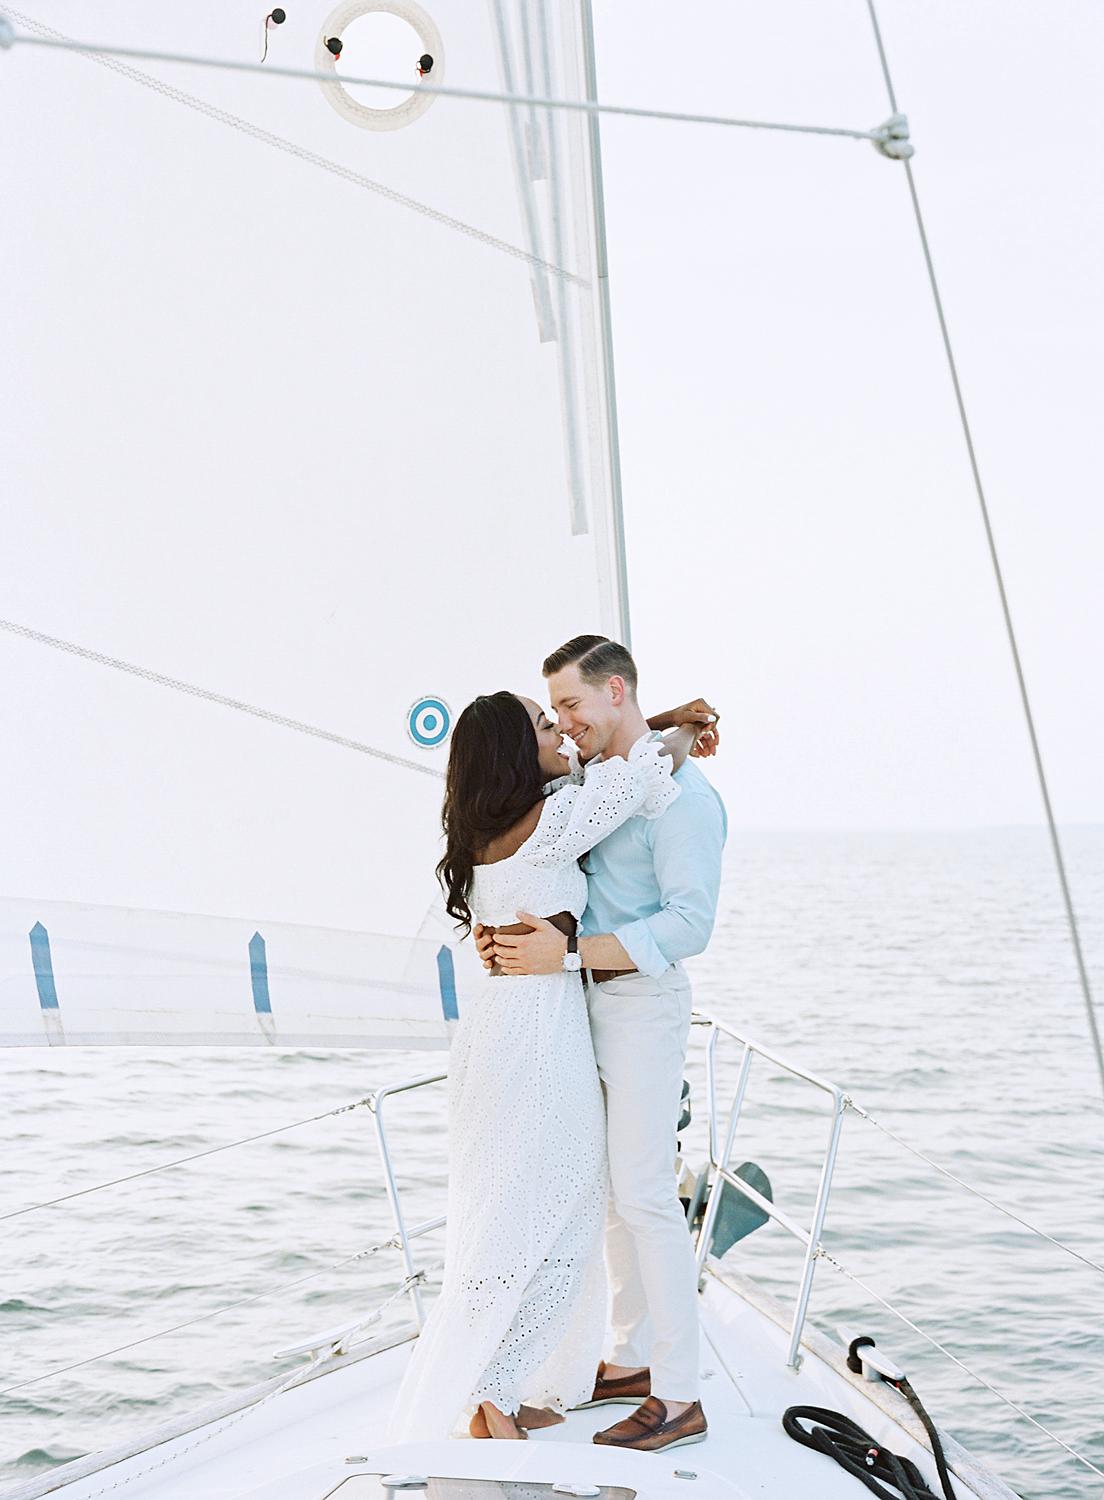 Bride throwing her arms around groom on the boat on The Chesapeake bay.